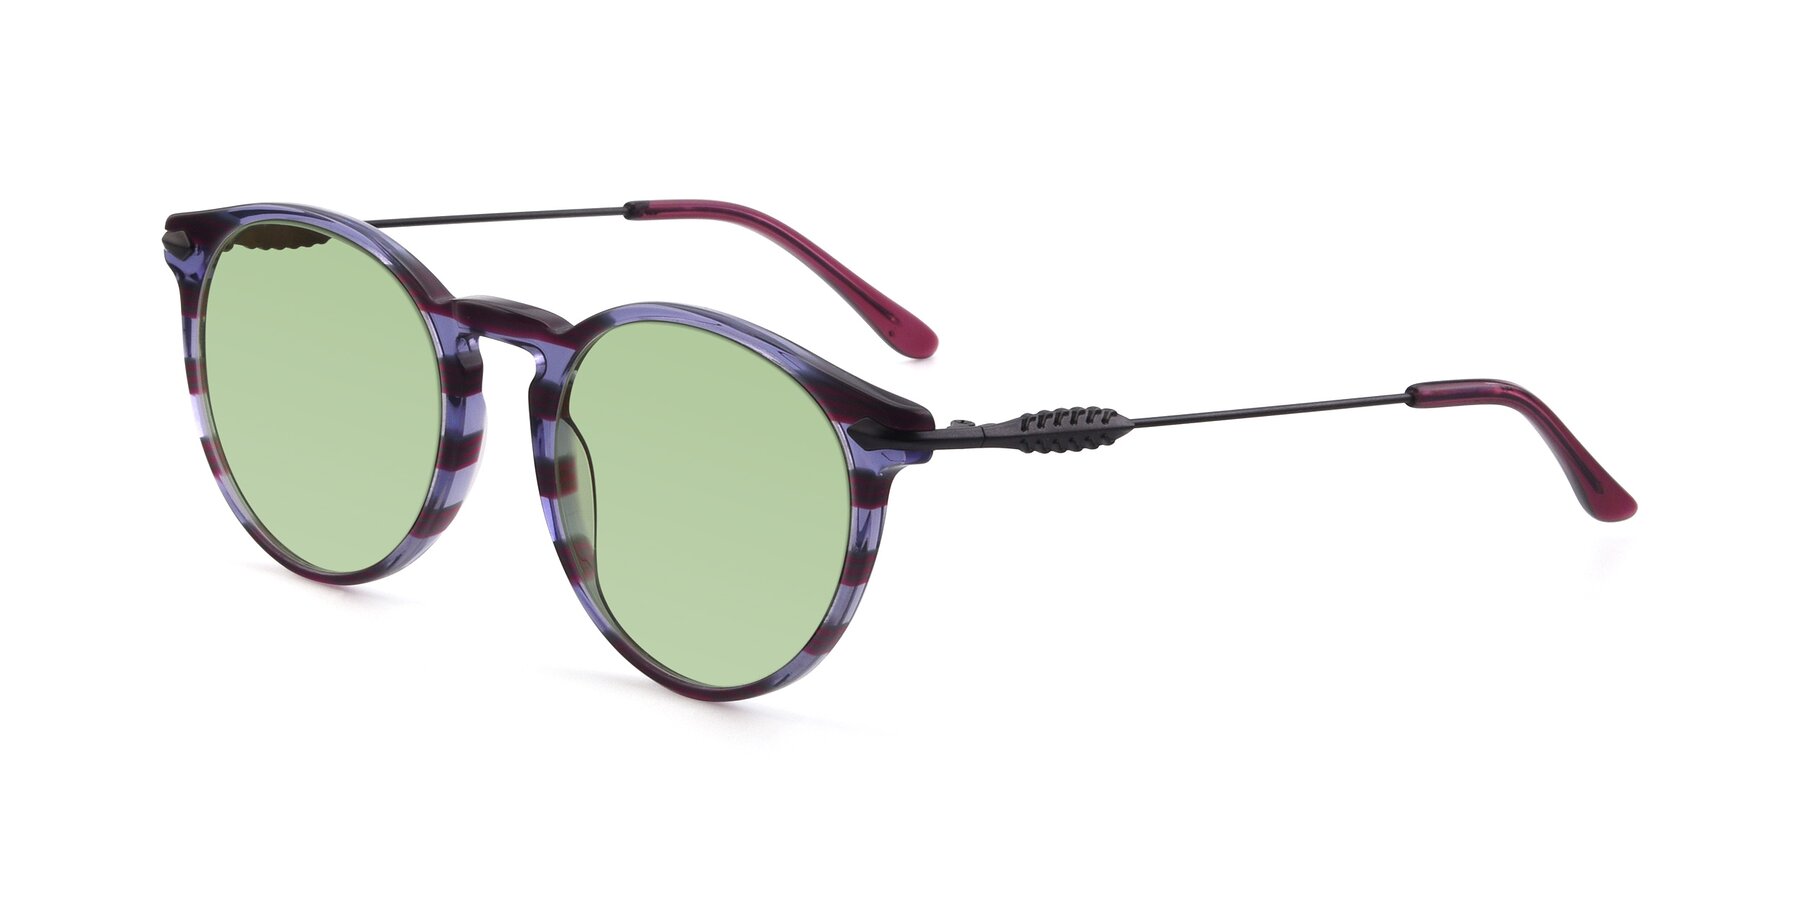 Angle of 17660 in Stripe Purple with Medium Green Tinted Lenses